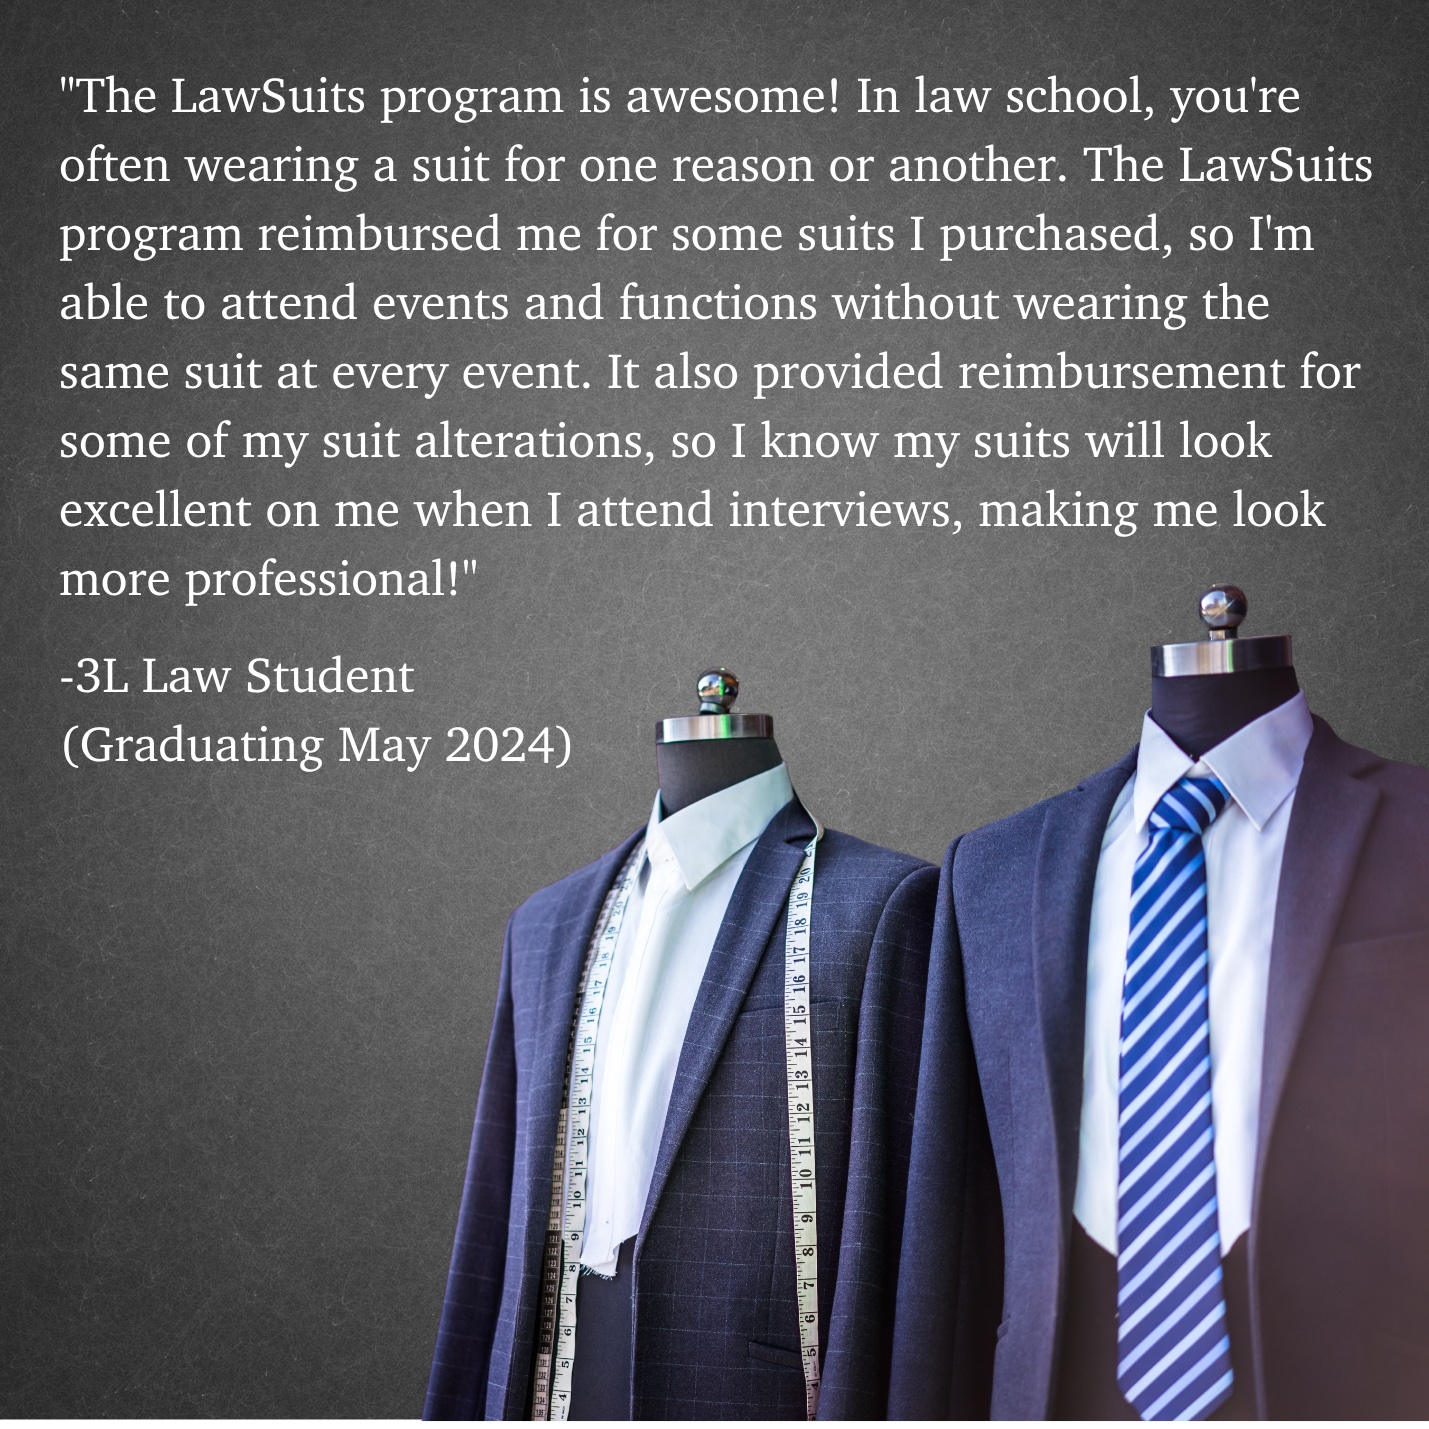 The Lawsuits program is awesome! In law school, you're constantly wearing a suit for one reason or another. The Lawsuits program reimbursed me for some suits I purchased so I'm able to attend events and functions without wearing the same suit at every event. It also provided reimbursement for some of my suit alterations so I know my suits will look excellent on me when I attend interviews, making me look more professional!"  -3L Law Student (Graduating May 2024)